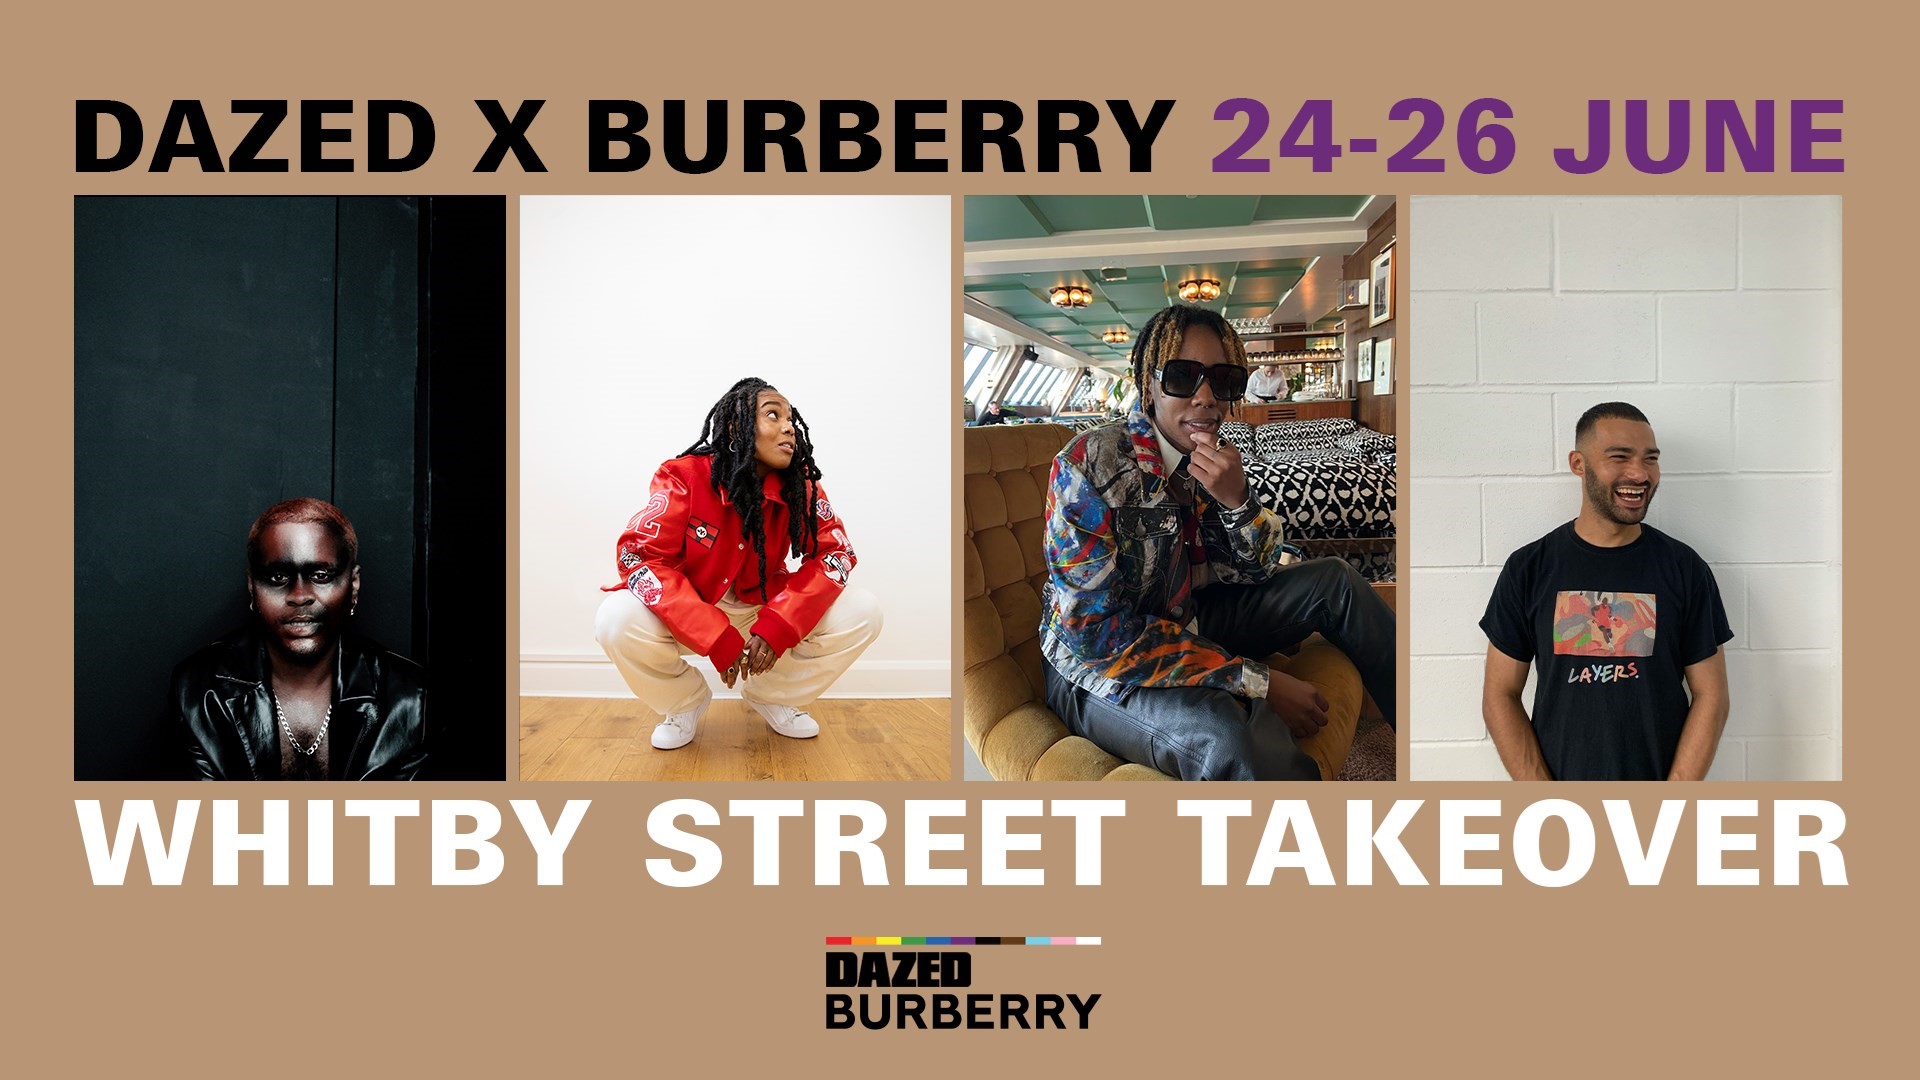 Dazed is taking over a London street with Burberry and you're invited |  Dazed